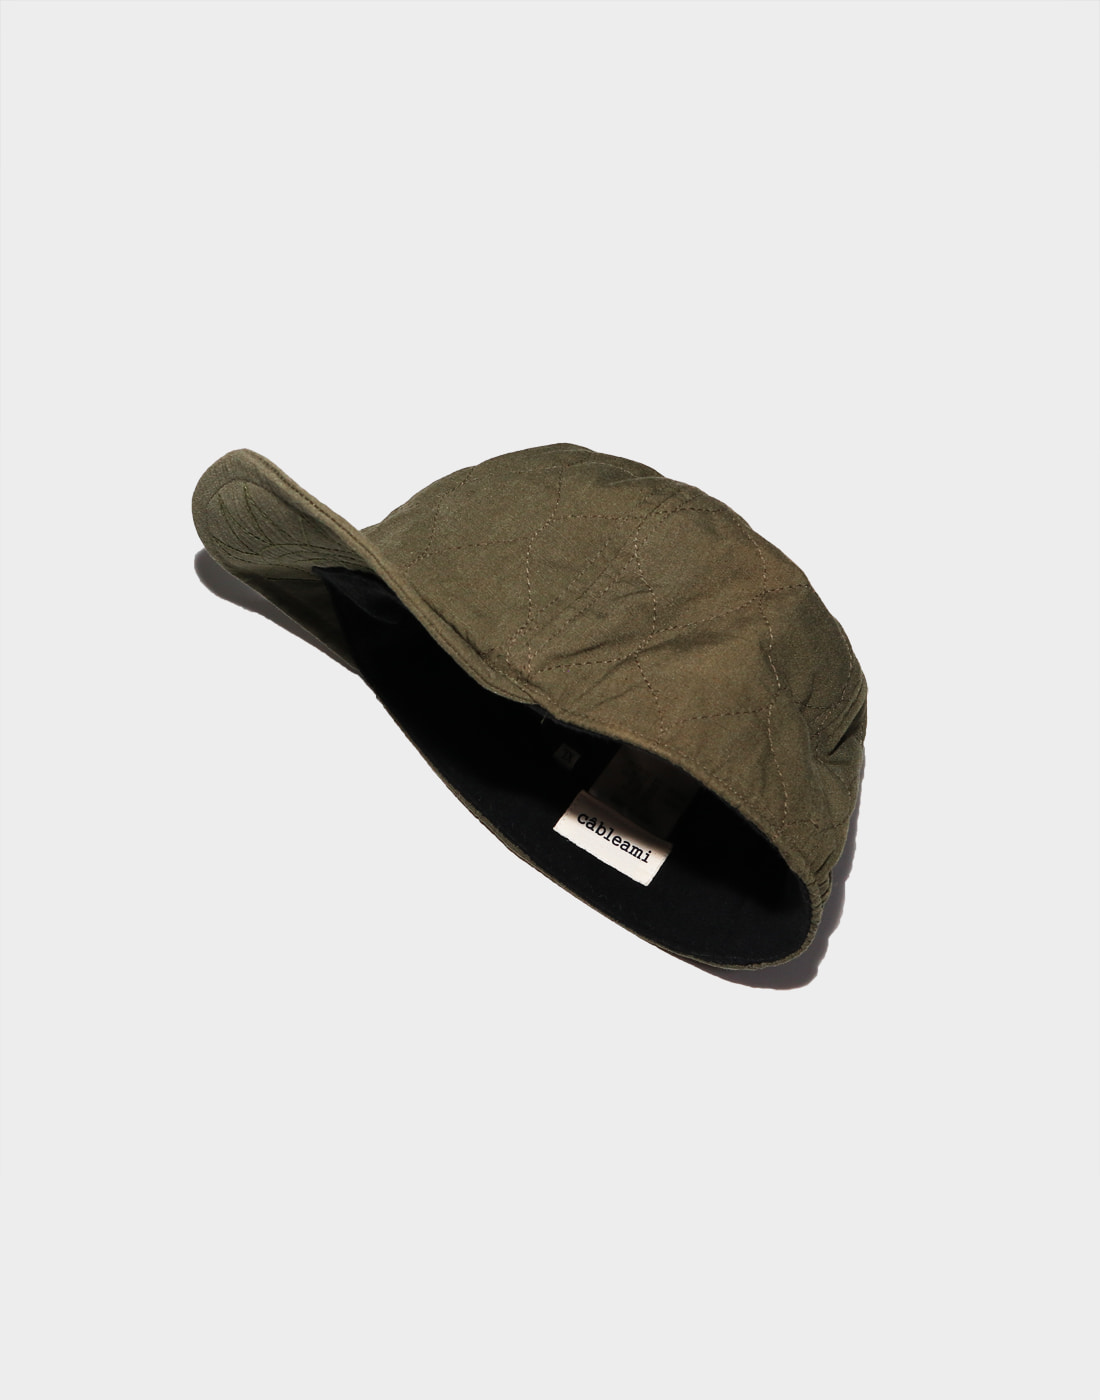 CABLEAMI A-3 Cap, Olive